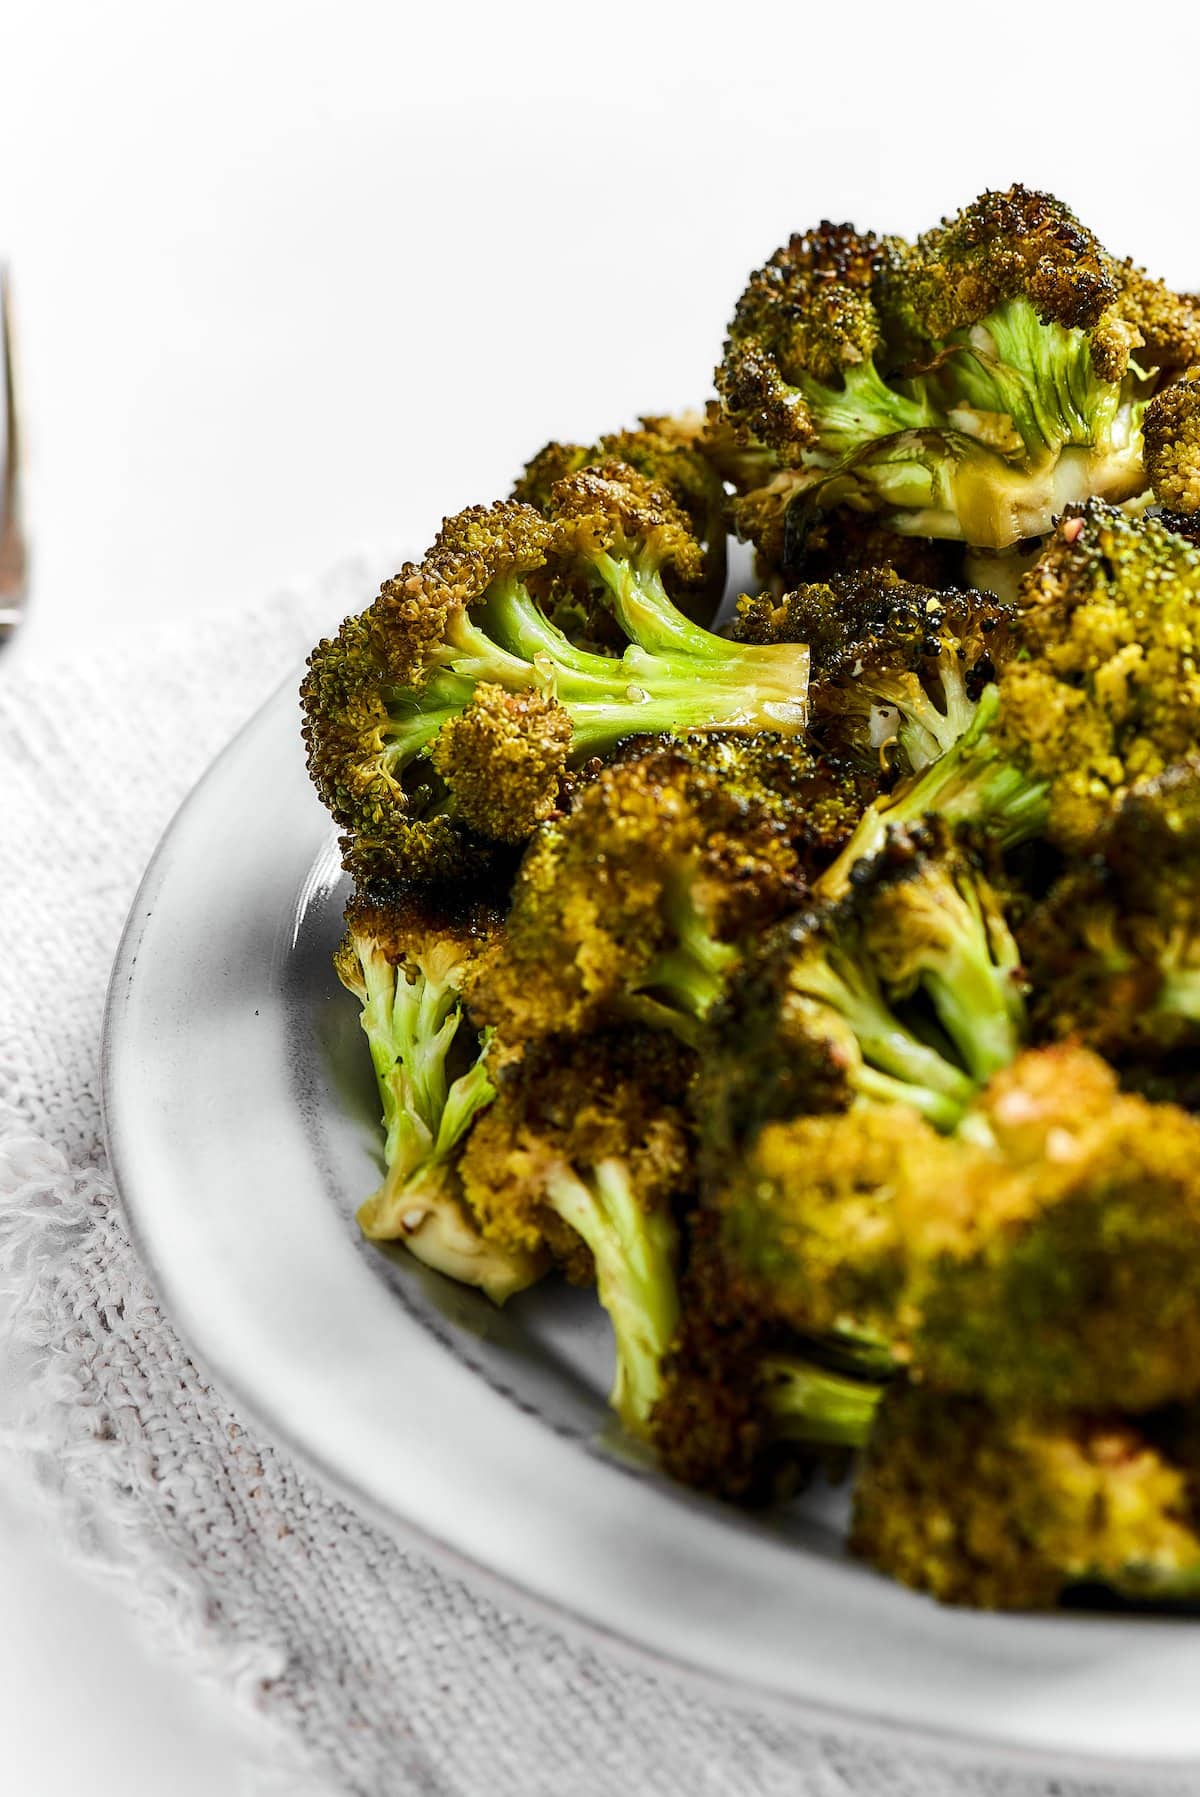 A bowl of roasted broccoli.